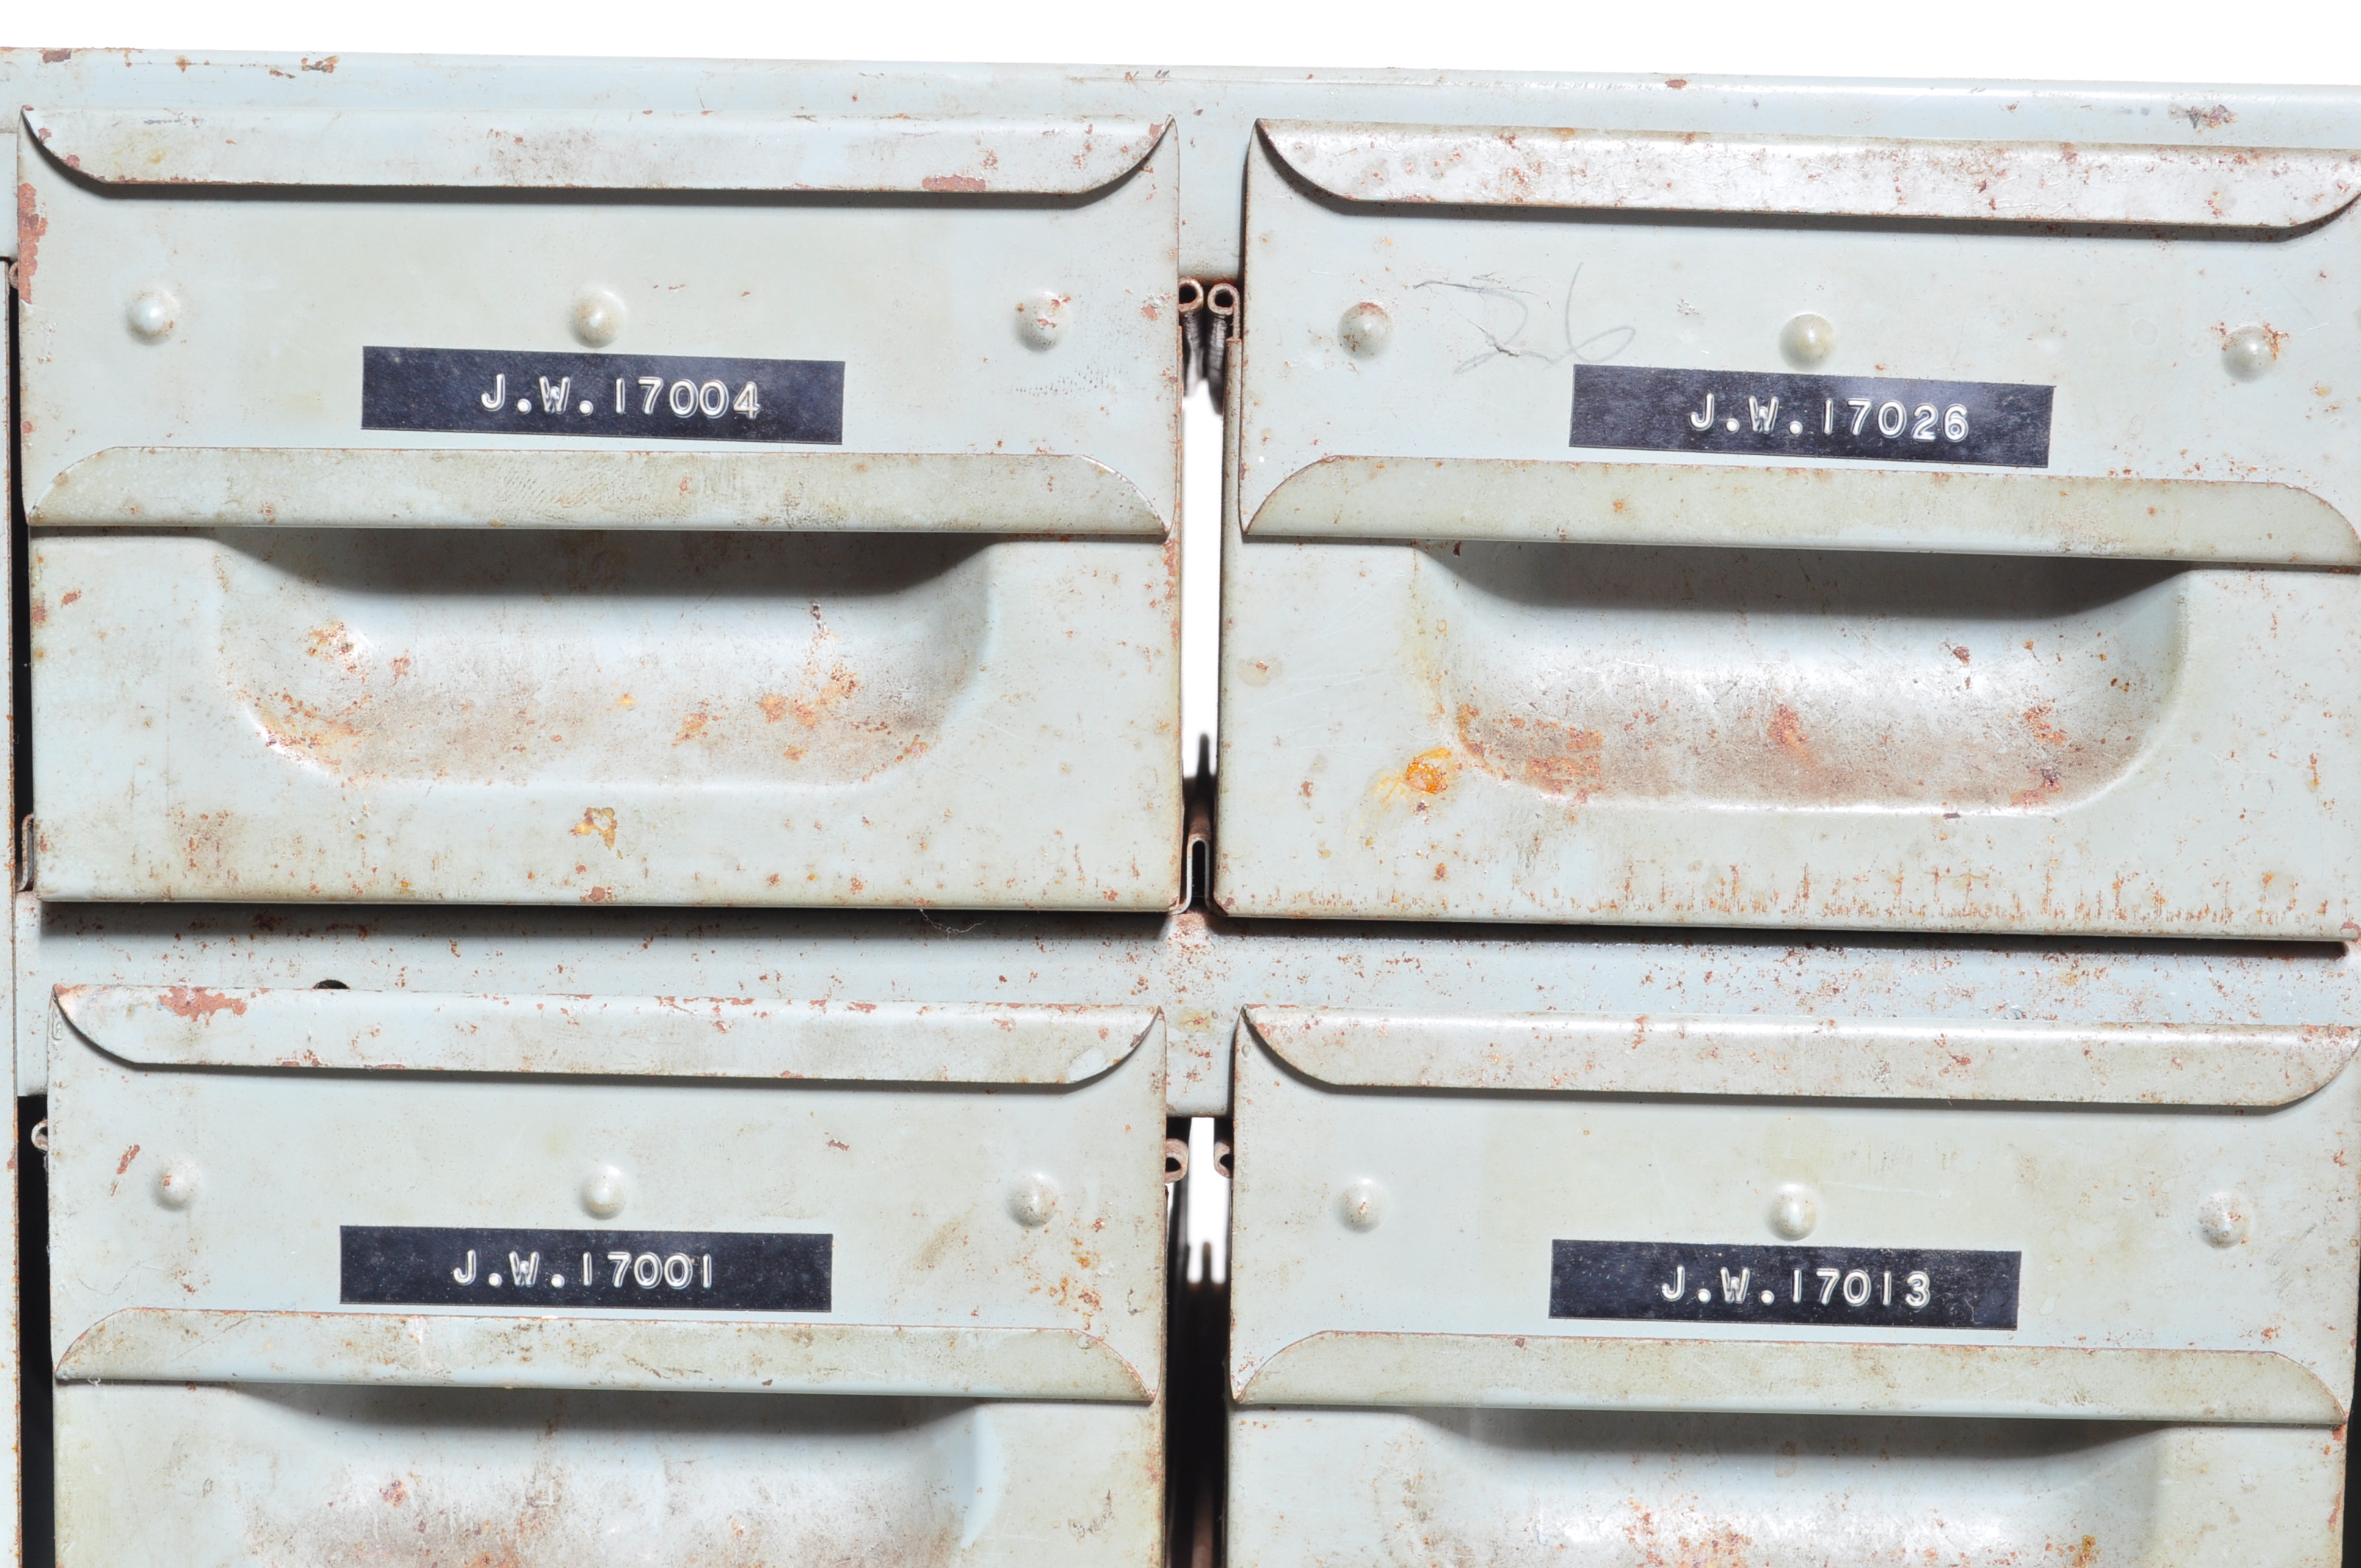 RETRO VINTAGE INDUSTRIAL FACTORY DRAWERS / TOOL CABINETS - Image 3 of 11